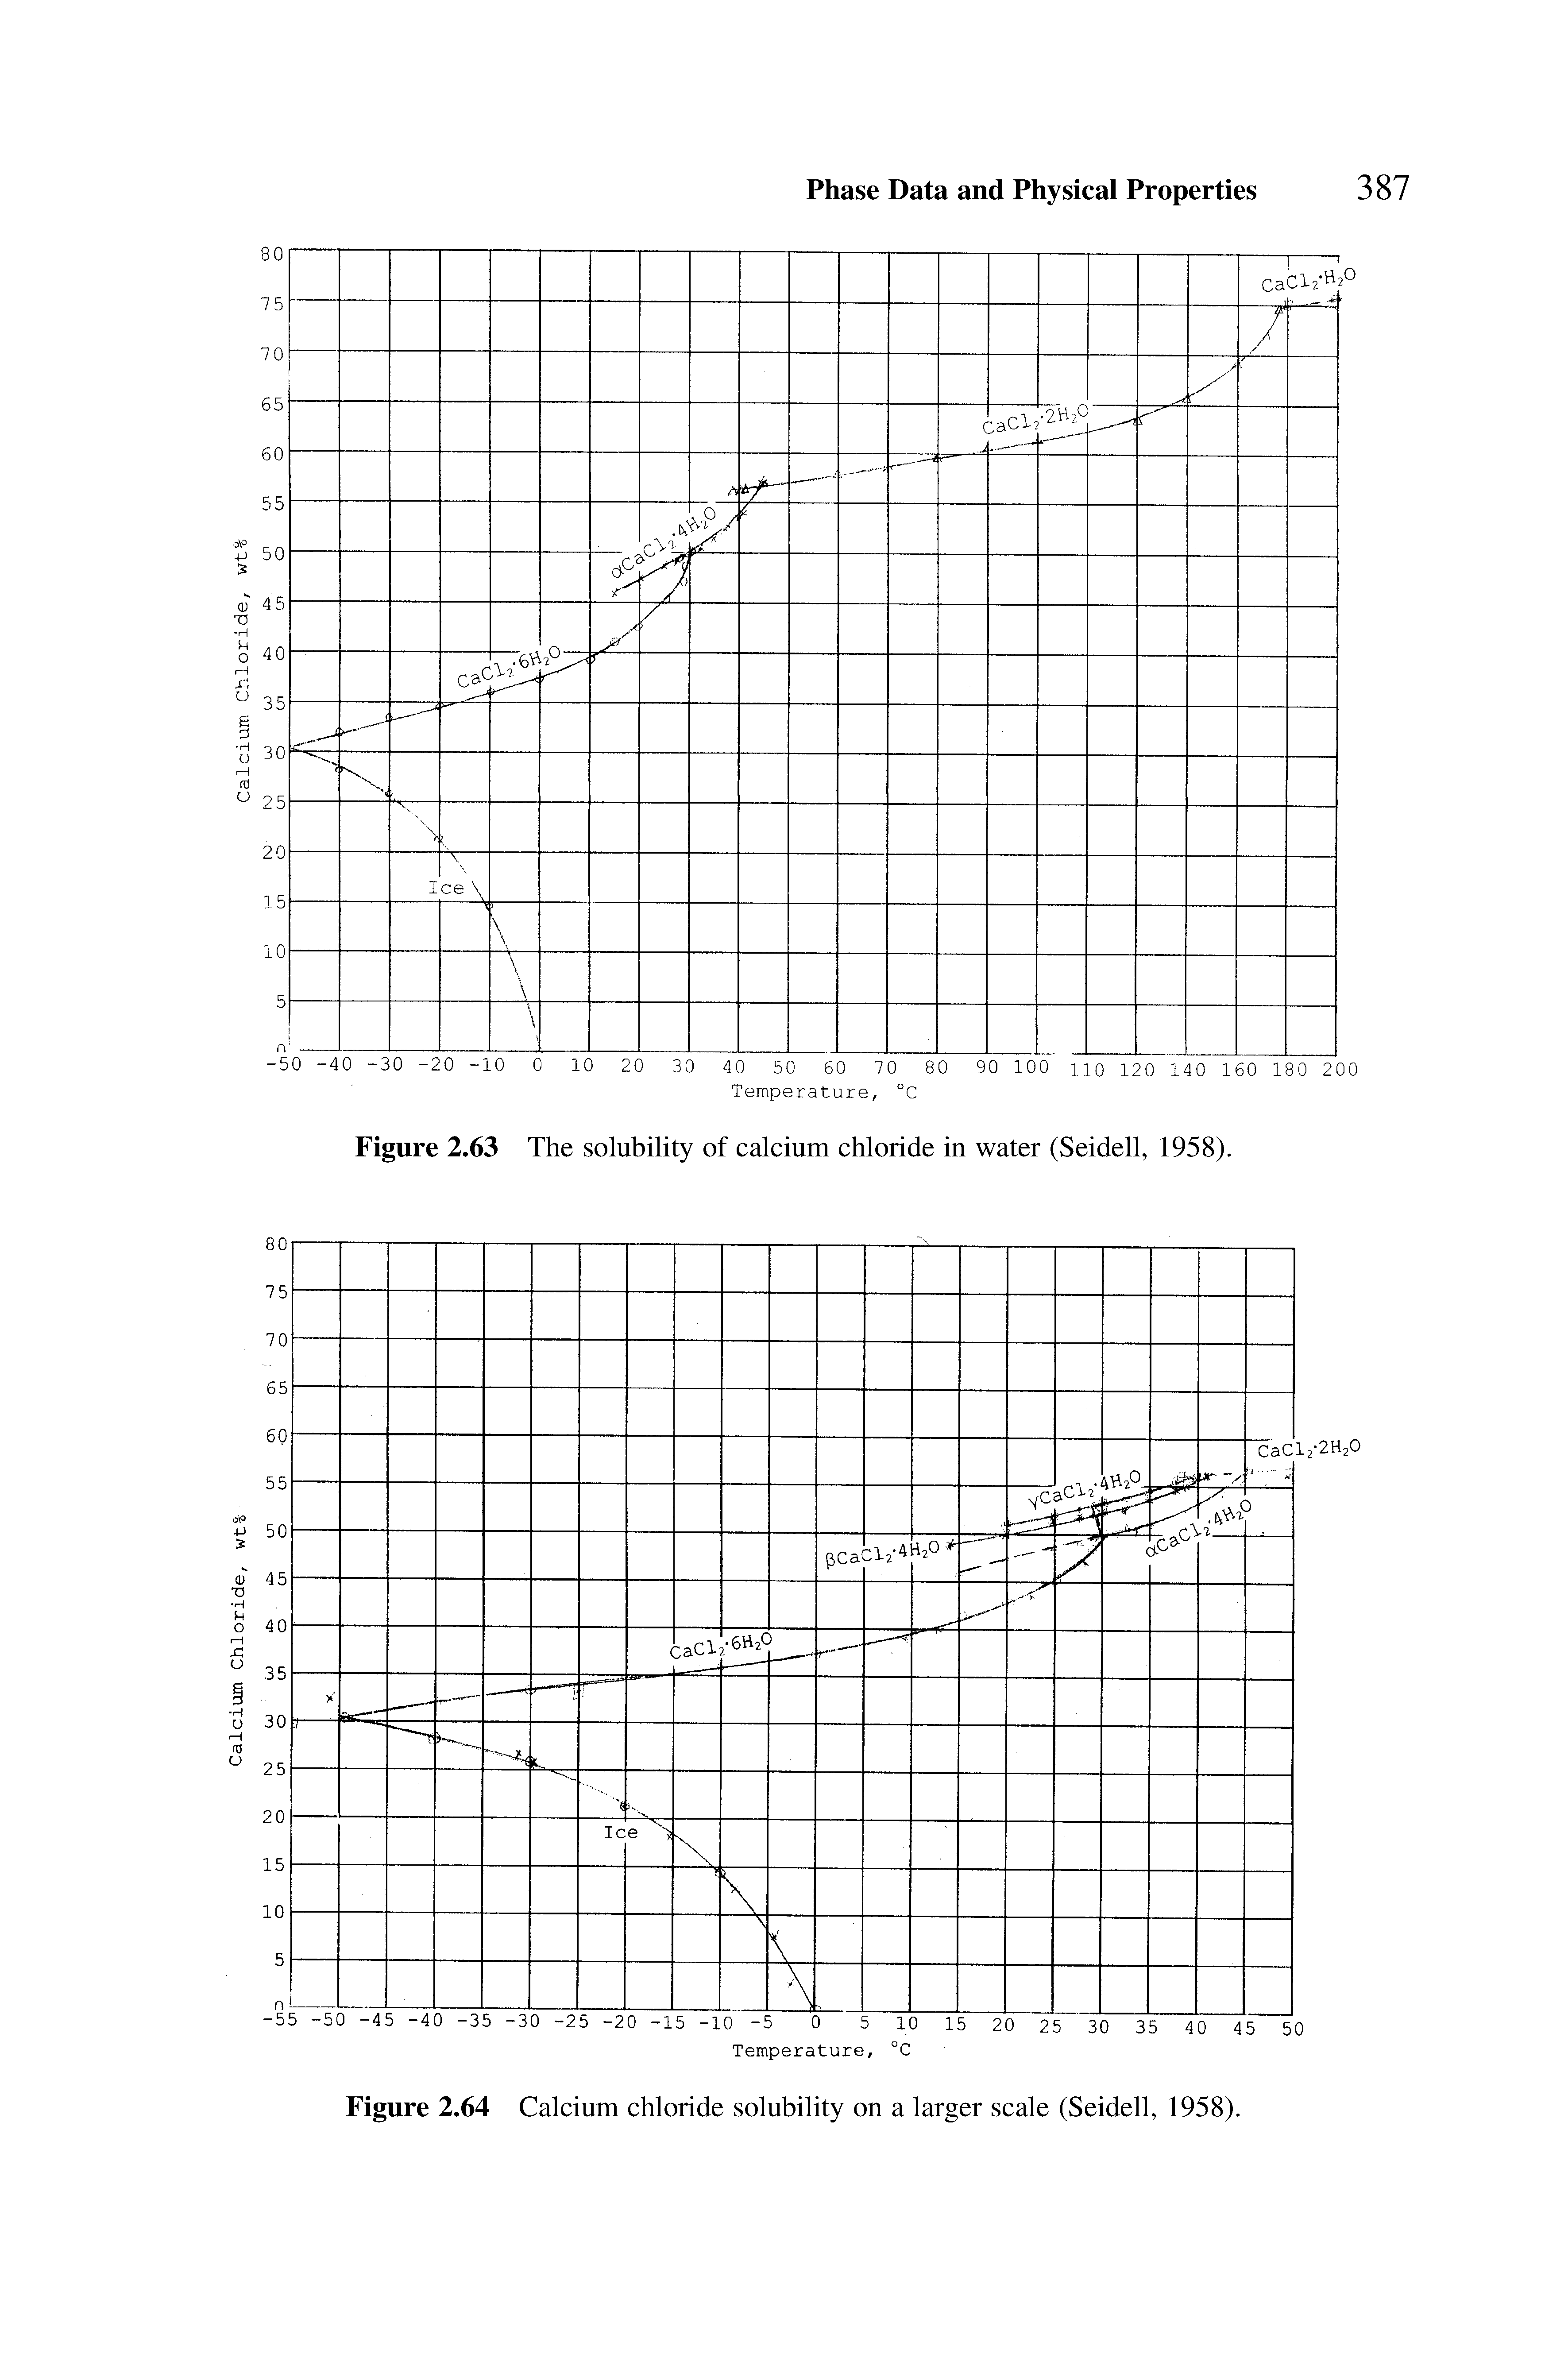 Figure 2.64 Calcium chloride solubility on a larger scale (Seidell, 1958).